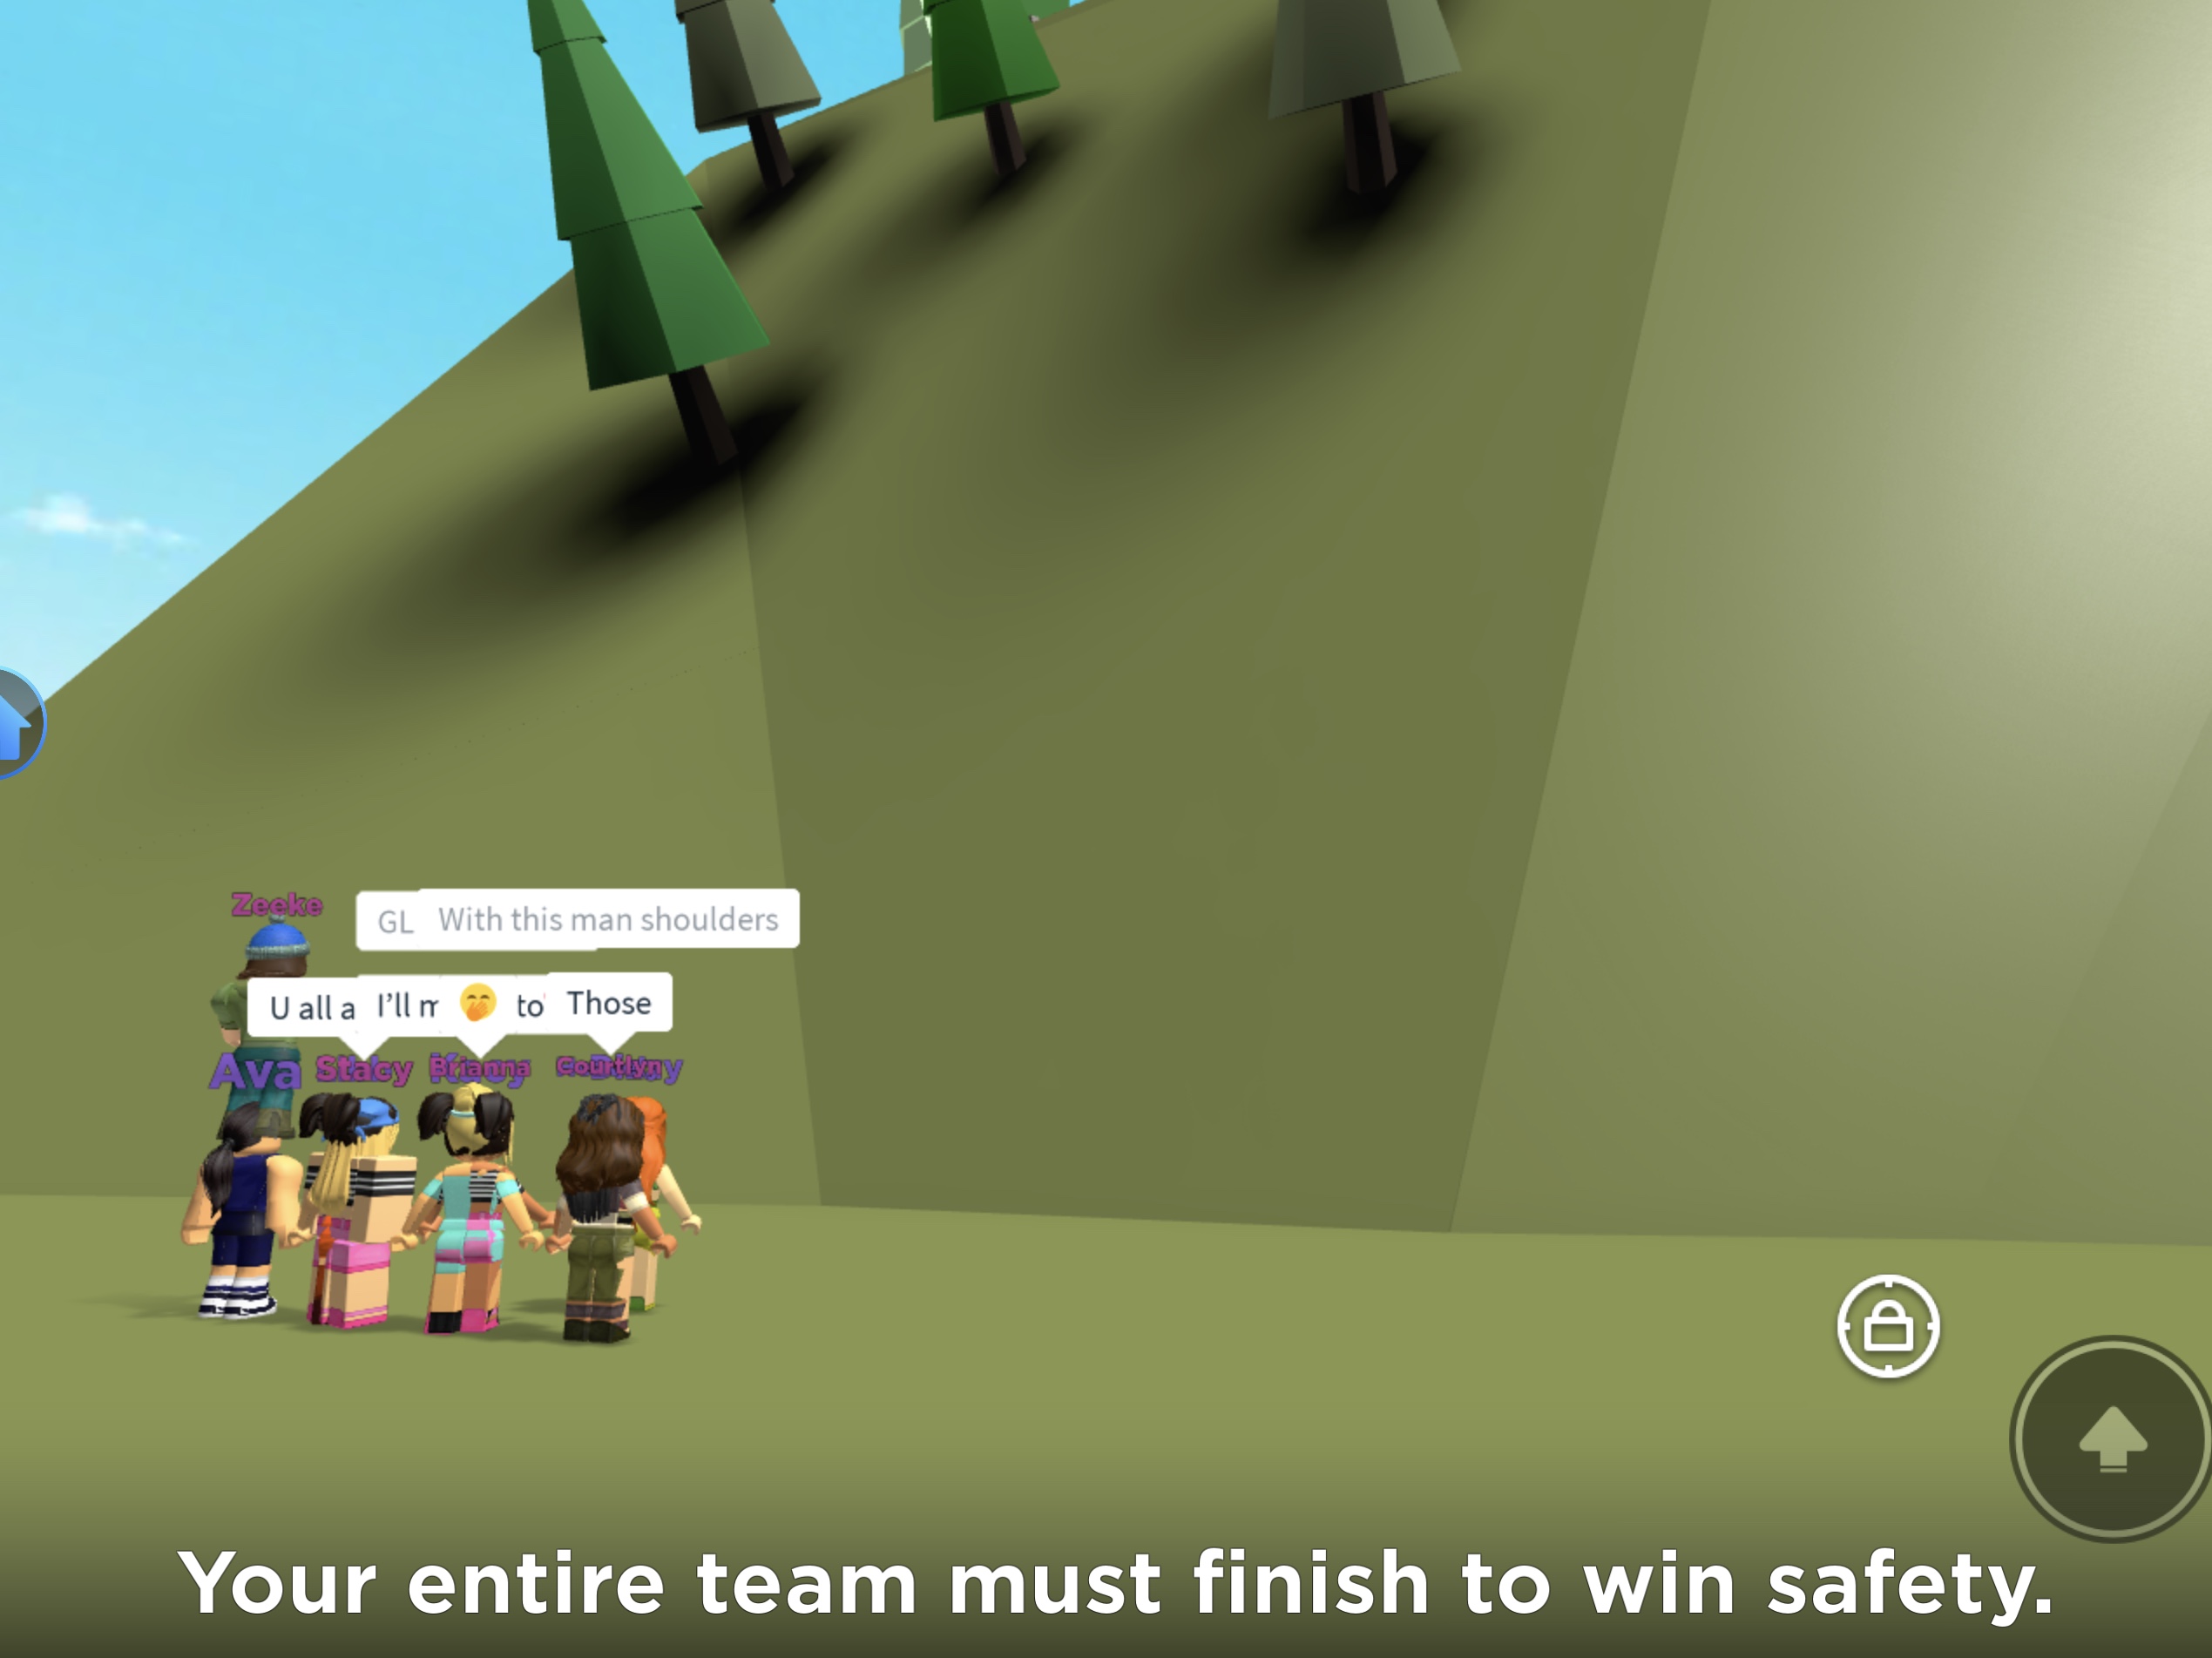 Total Roblox Drama [Auto Win Obbies, Coin teleports, WalkSpeed